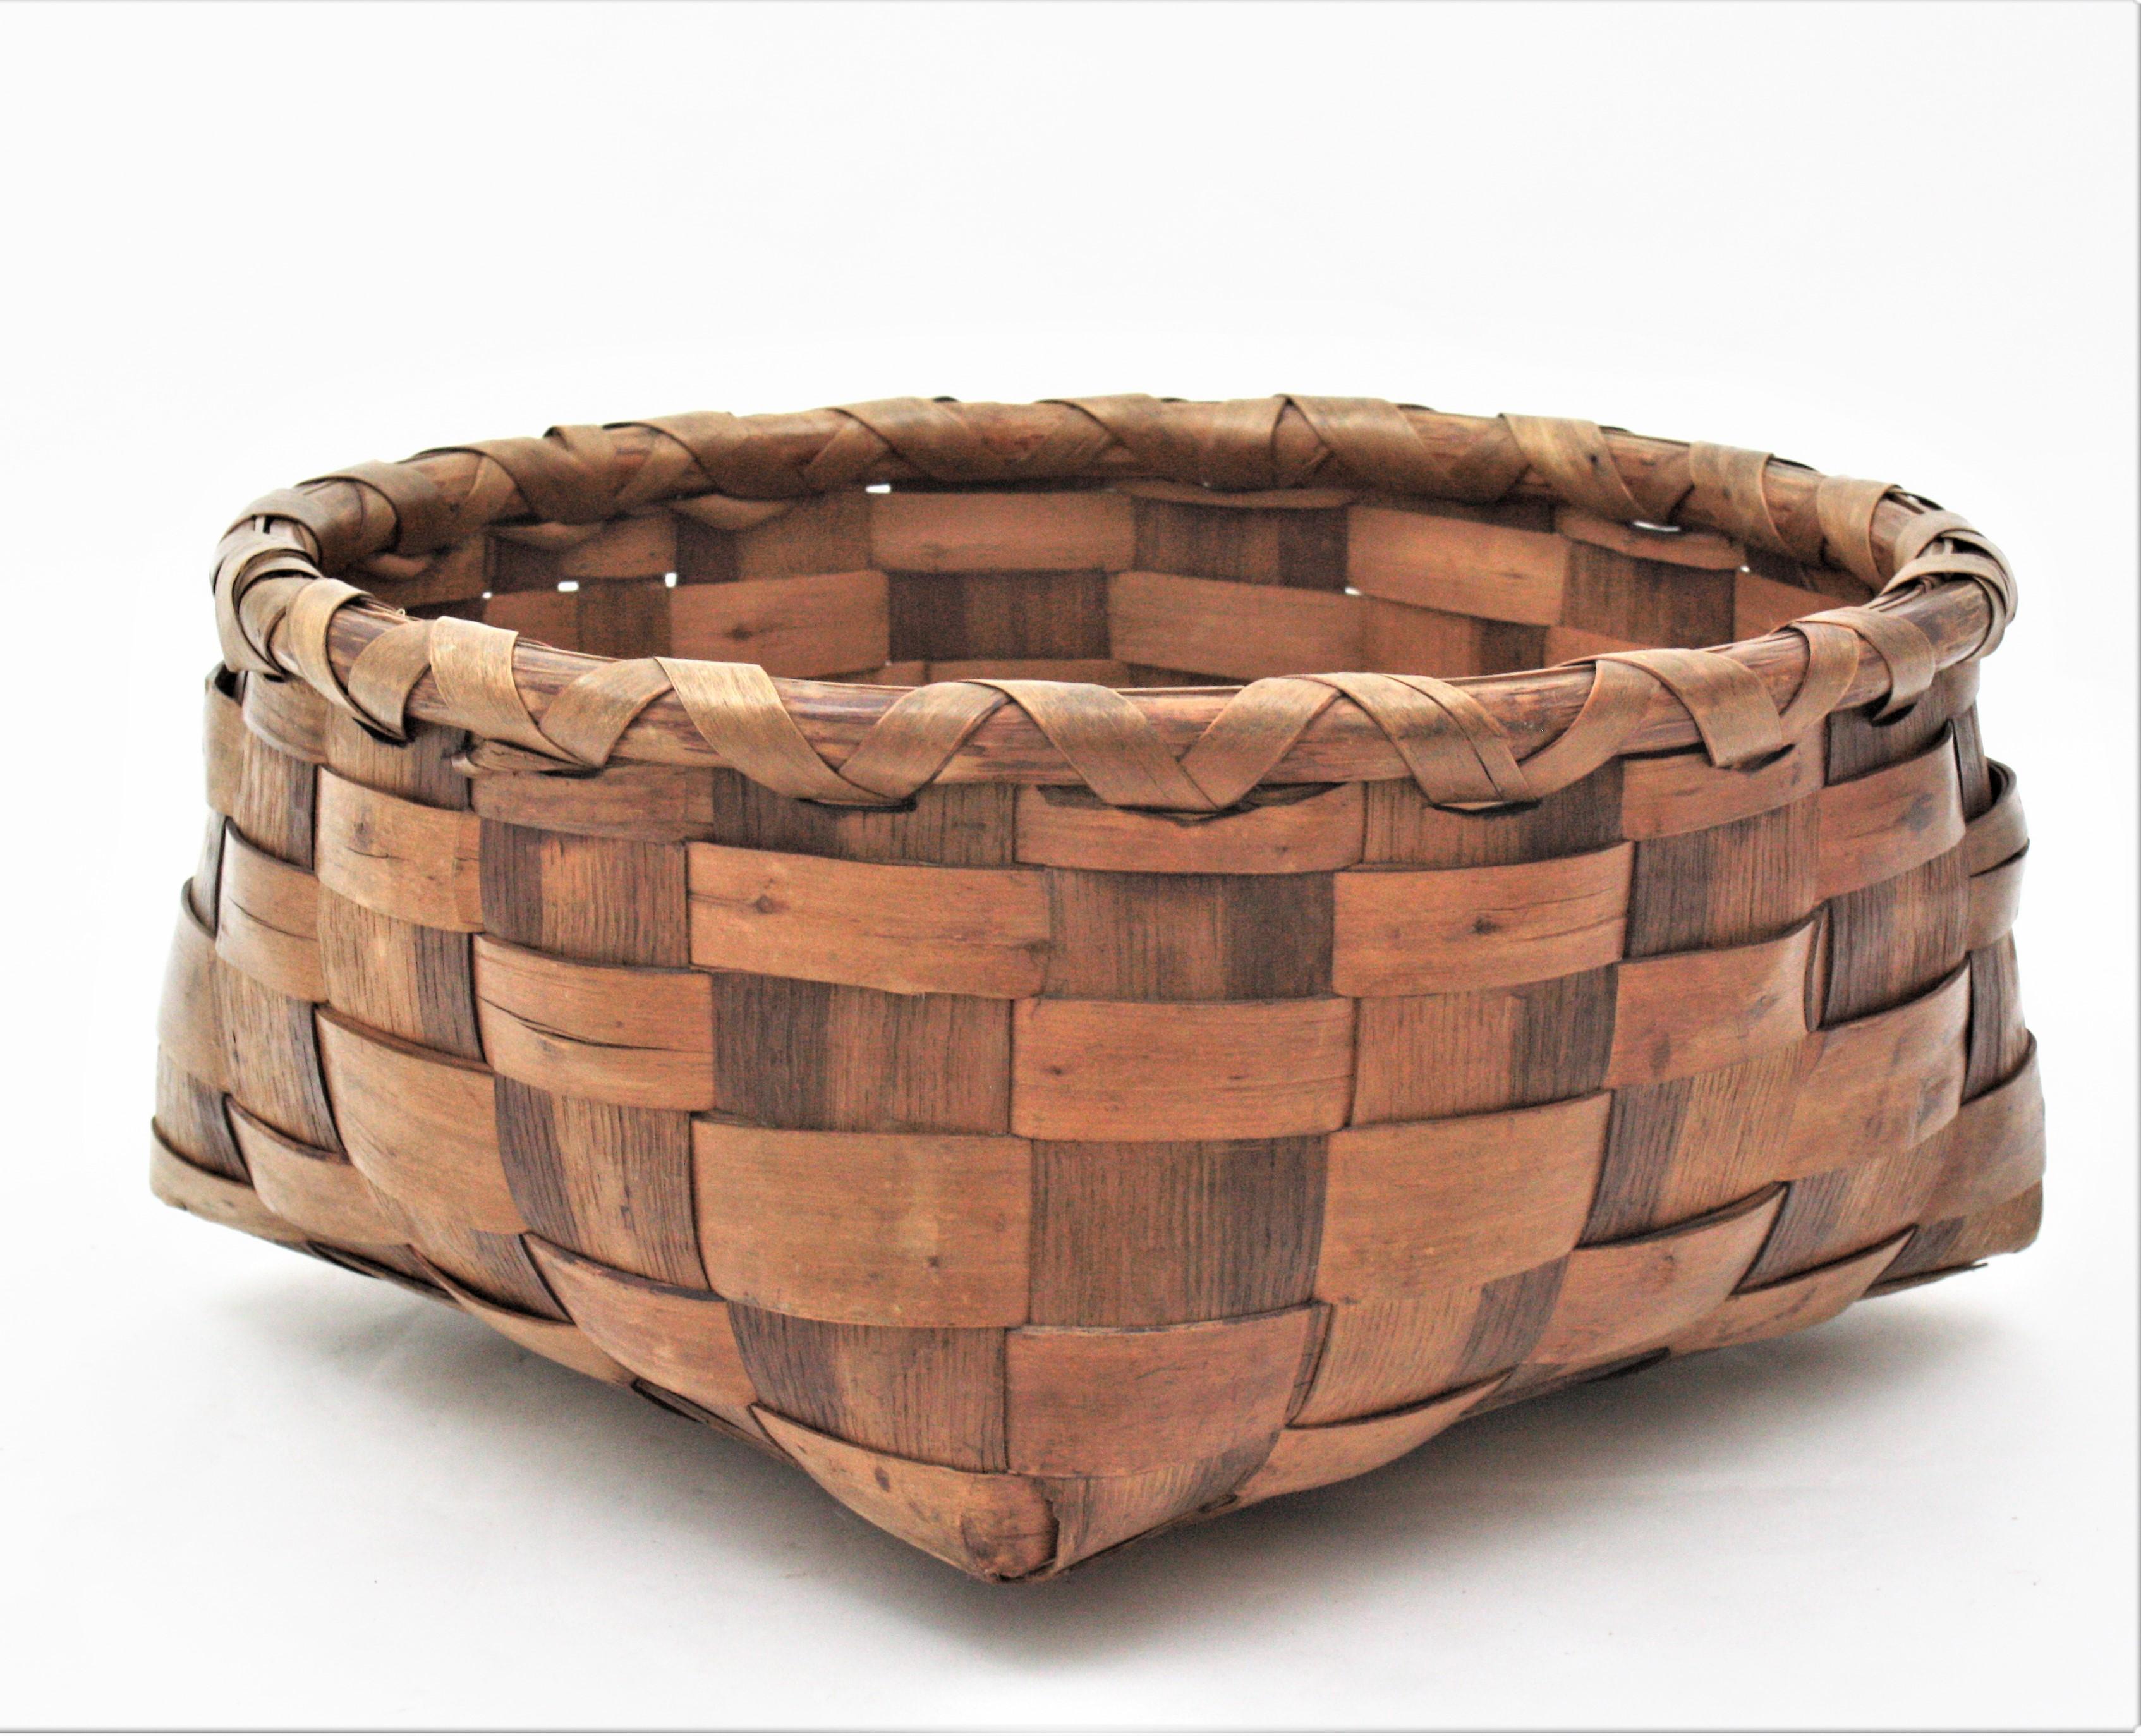 Spanish Braided Wood Large Rustic Basket, 1940s For Sale 1